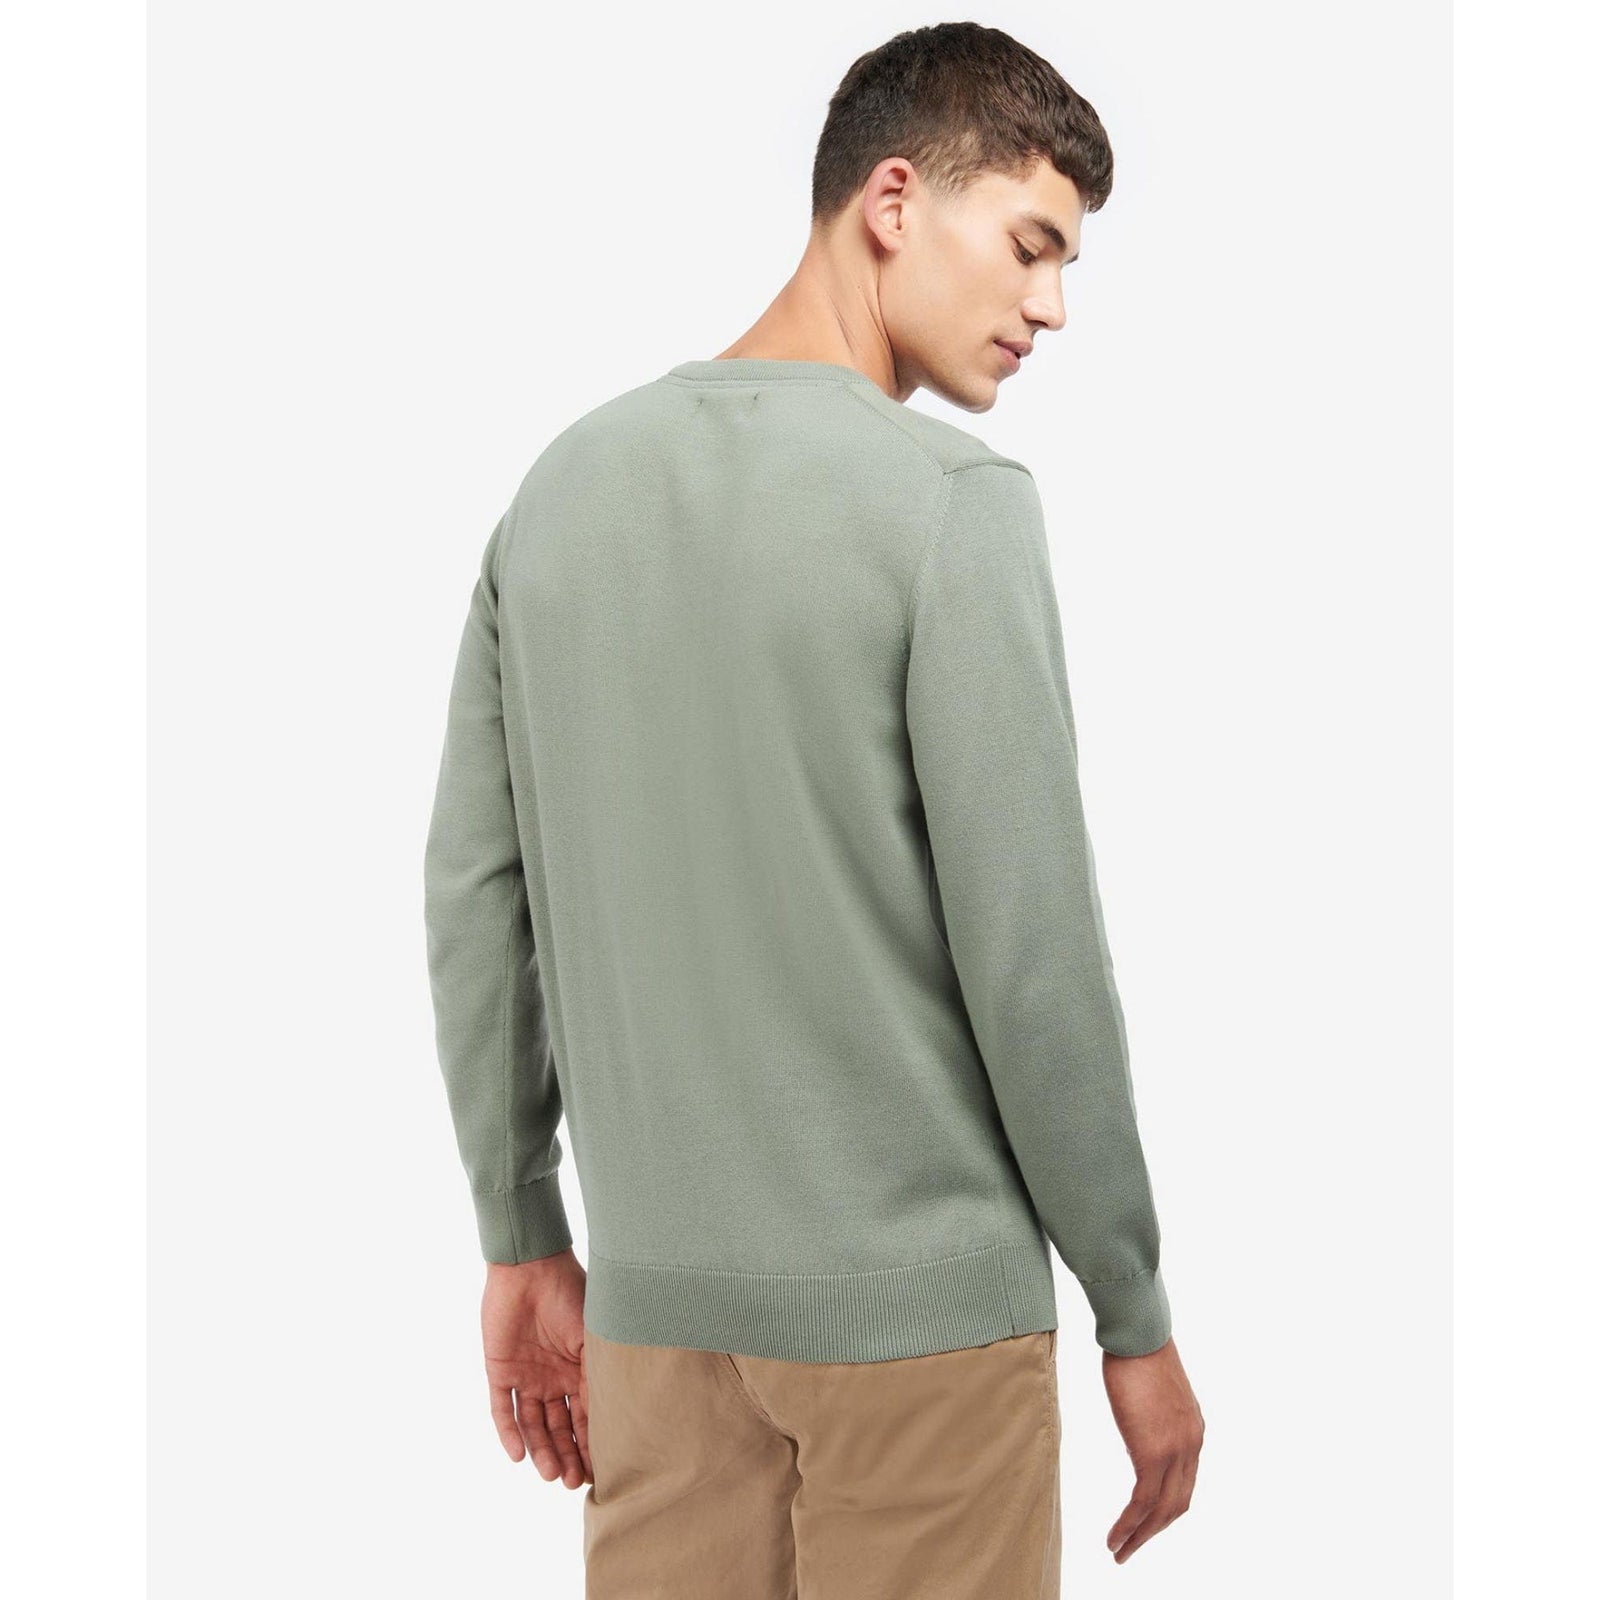 Barbour Pima Cotton Crew Neck in Agave Green